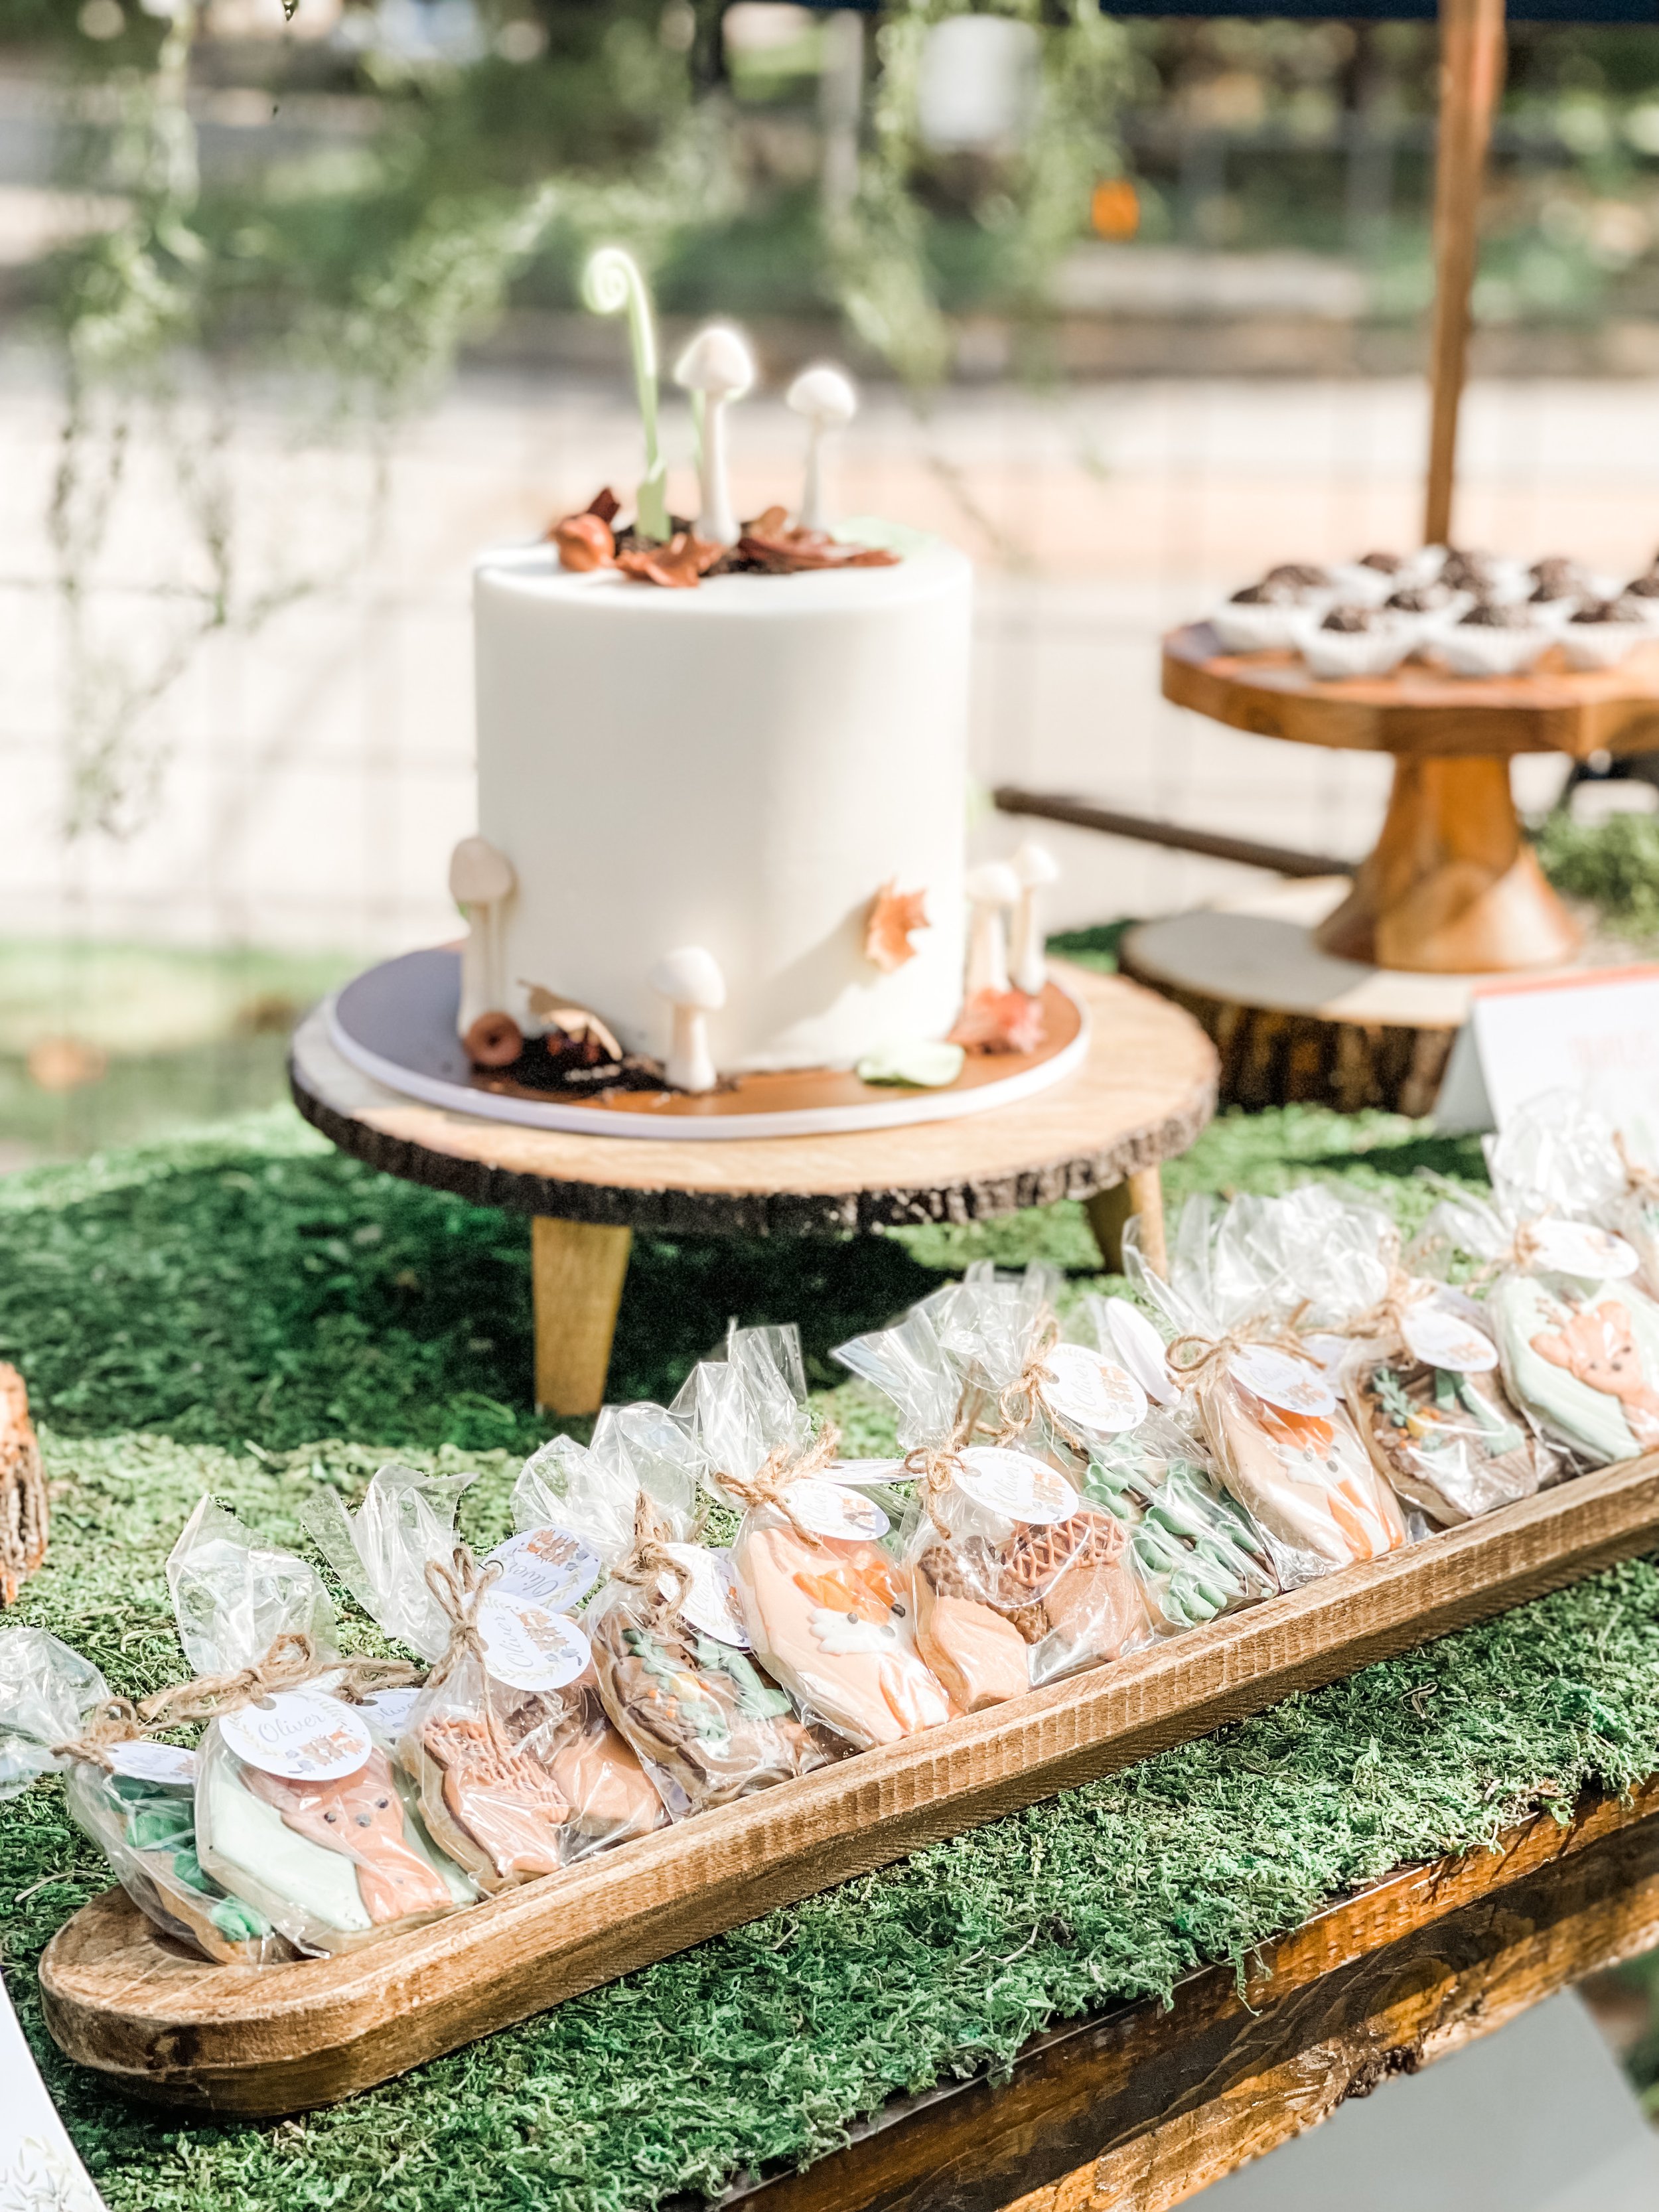  Woodland-themed first birthday dessert table with white frosted cake and fondant mushroom, plant, and leaf decorations on a wood slice pedestal stand, with woodland-themed iced cookie favors in individual plastic bags 